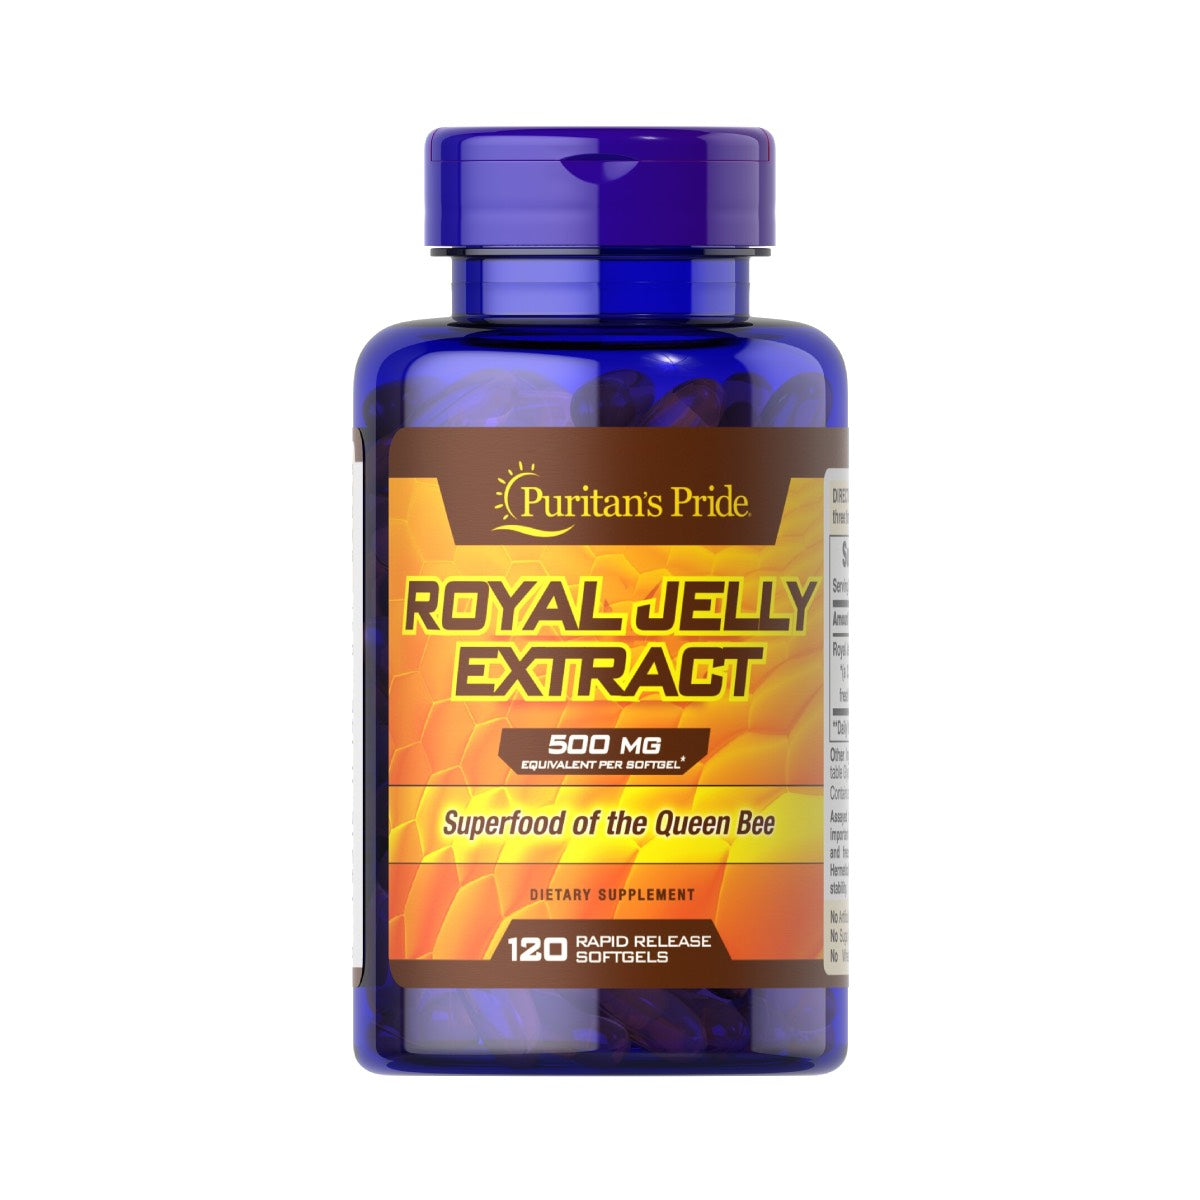 Puritan's Pride, Royal Jelly Extract 500 mg